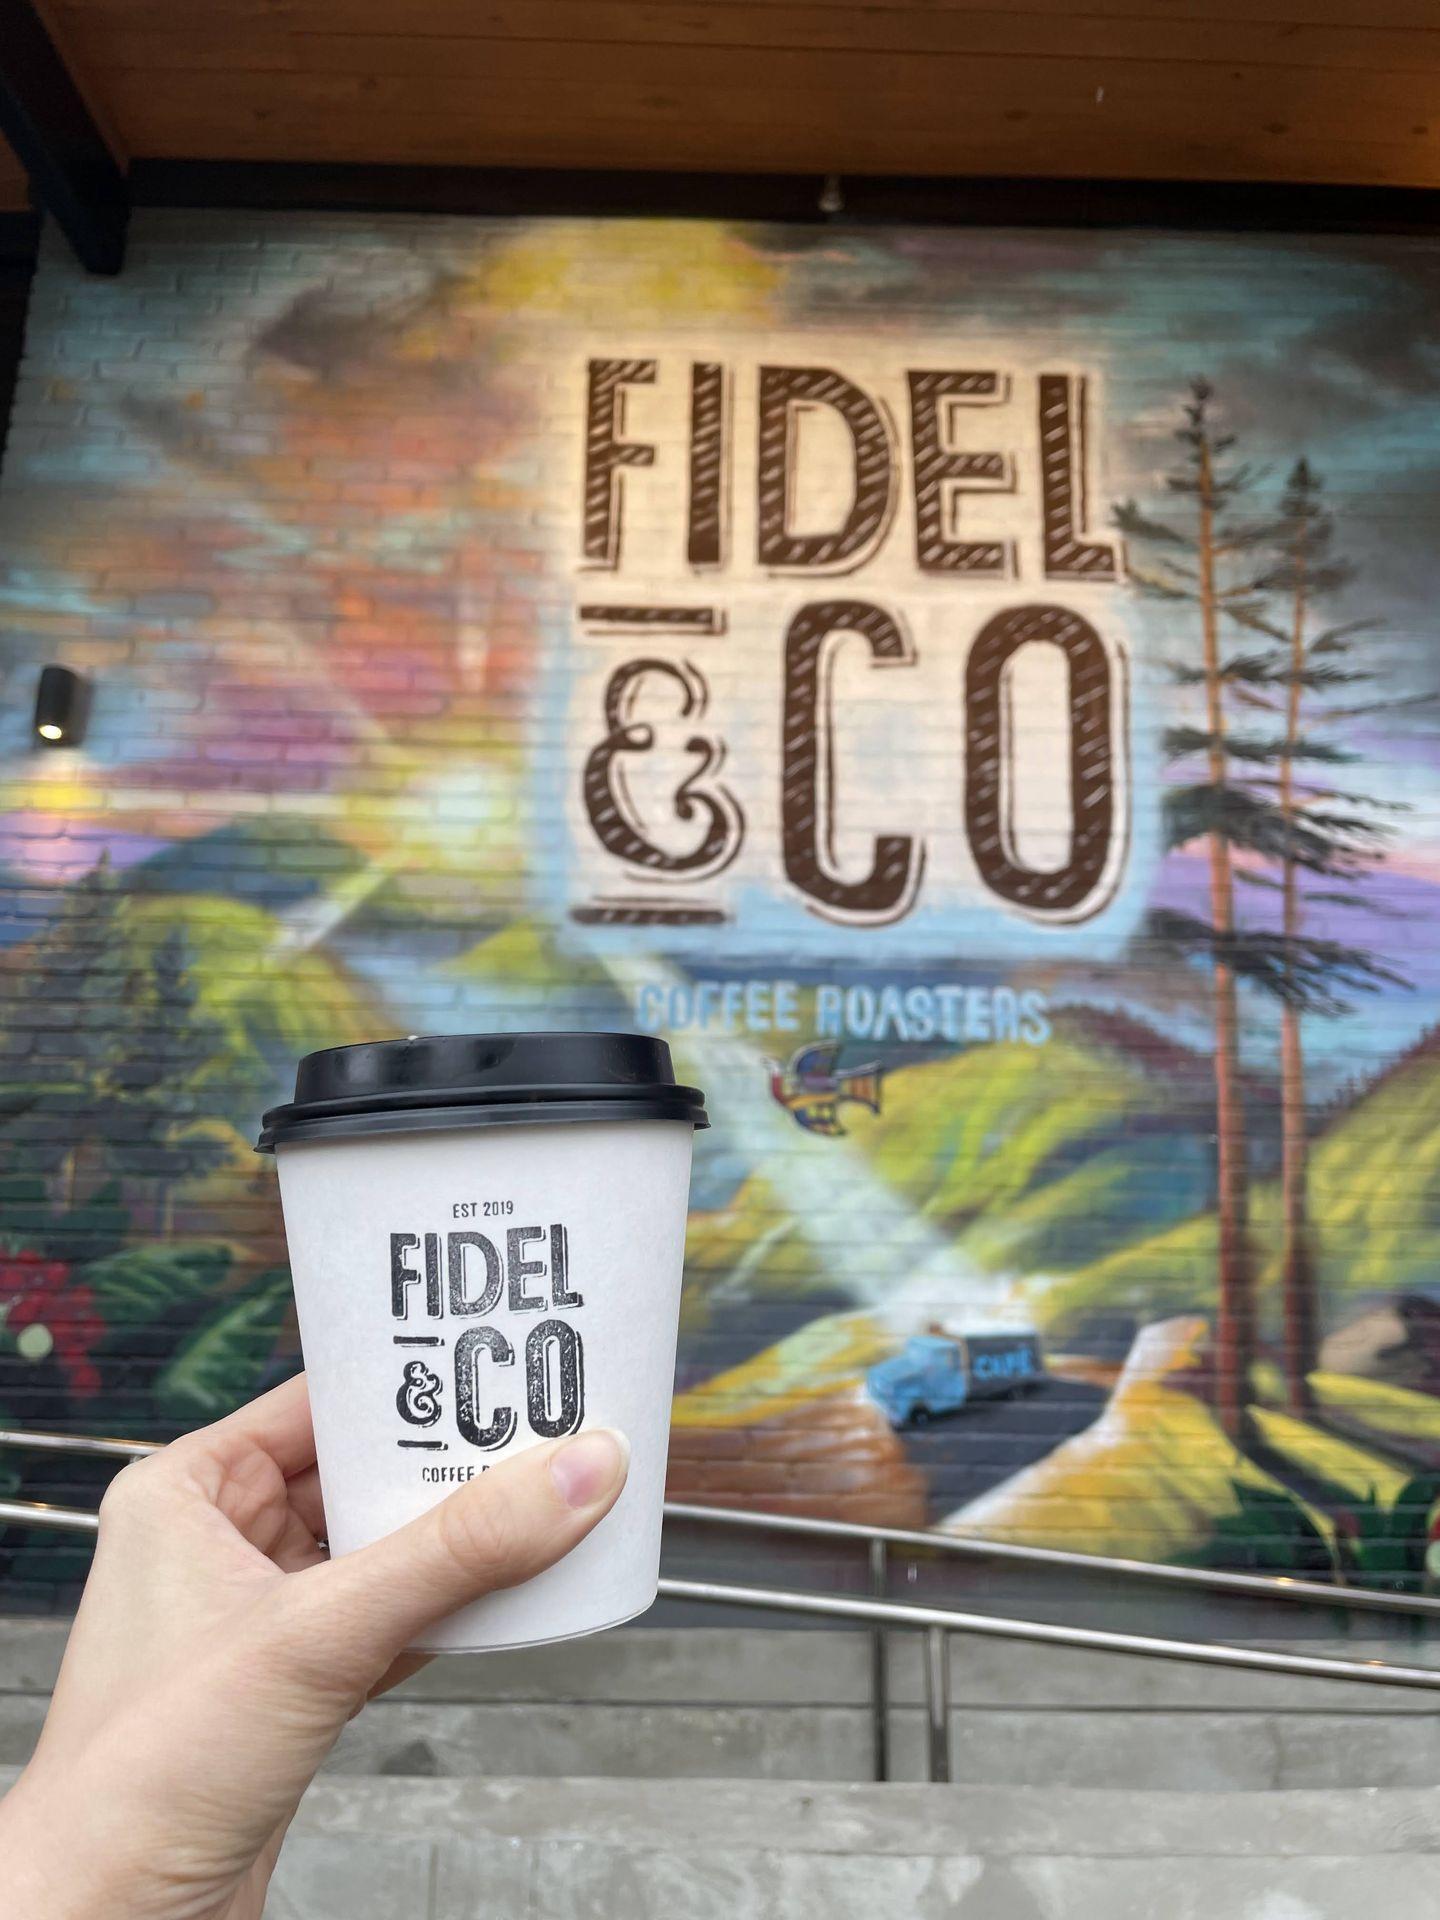 Holding up a coffee cup in front of a mural. The mural has green mountains, greens and a colorful sky, with the words 'Fidel & Co' in the middle.